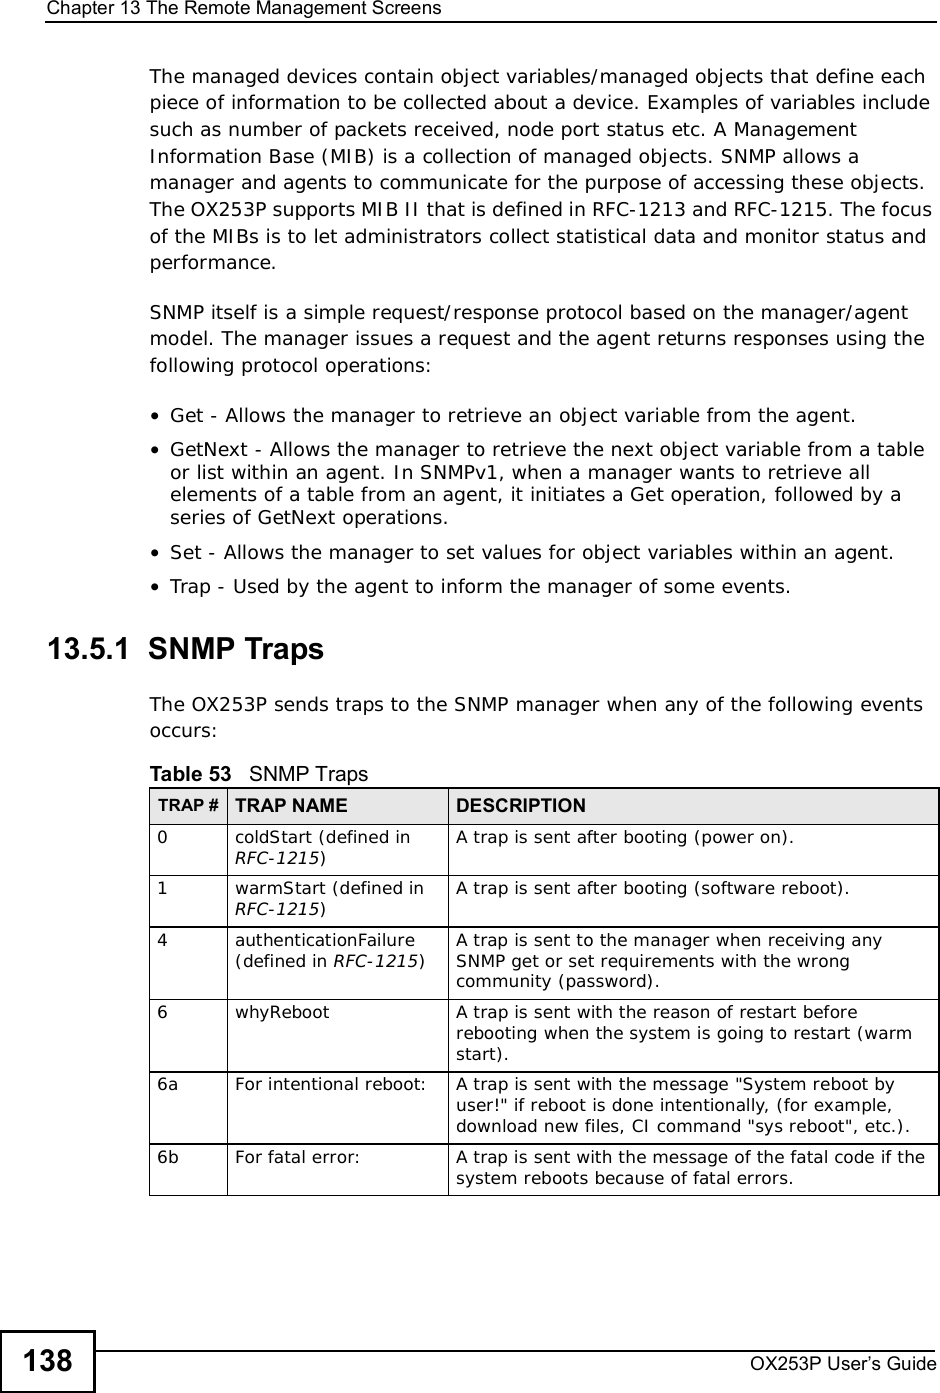 Chapter 13The Remote Management ScreensOX253P User’s Guide138The managed devices contain object variables/managed objects that define each piece of information to be collected about a device. Examples of variables include such as number of packets received, node port status etc. A Management Information Base (MIB) is a collection of managed objects. SNMP allows a manager and agents to communicate for the purpose of accessing these objects. The OX253P supports MIB II that is defined in RFC-1213 and RFC-1215. The focus of the MIBs is to let administrators collect statistical data and monitor status and performance.SNMP itself is a simple request/response protocol based on the manager/agent model. The manager issues a request and the agent returns responses using the following protocol operations: •Get - Allows the manager to retrieve an object variable from the agent. •GetNext - Allows the manager to retrieve the next object variable from a table or list within an agent. In SNMPv1, when a manager wants to retrieve all elements of a table from an agent, it initiates a Get operation, followed by a series of GetNext operations. •Set - Allows the manager to set values for object variables within an agent. •Trap - Used by the agent to inform the manager of some events.13.5.1  SNMP TrapsThe OX253P sends traps to the SNMP manager when any of the following events occurs:          Table 53   SNMP TrapsTRAP # TRAP NAME DESCRIPTION0coldStart (defined in RFC-1215)A trap is sent after booting (power on).1warmStart (defined in RFC-1215)A trap is sent after booting (software reboot).4authenticationFailure (defined in RFC-1215)A trap is sent to the manager when receiving any SNMP get or set requirements with the wrong community (password).6whyReboot A trap is sent with the reason of restart before rebooting when the system is going to restart (warm start).6a For intentional reboot: A trap is sent with the message &quot;System reboot by user!&quot; if reboot is done intentionally, (for example, download new files, CI command &quot;sys reboot&quot;, etc.).6b For fatal error:  A trap is sent with the message of the fatal code if the system reboots because of fatal errors.